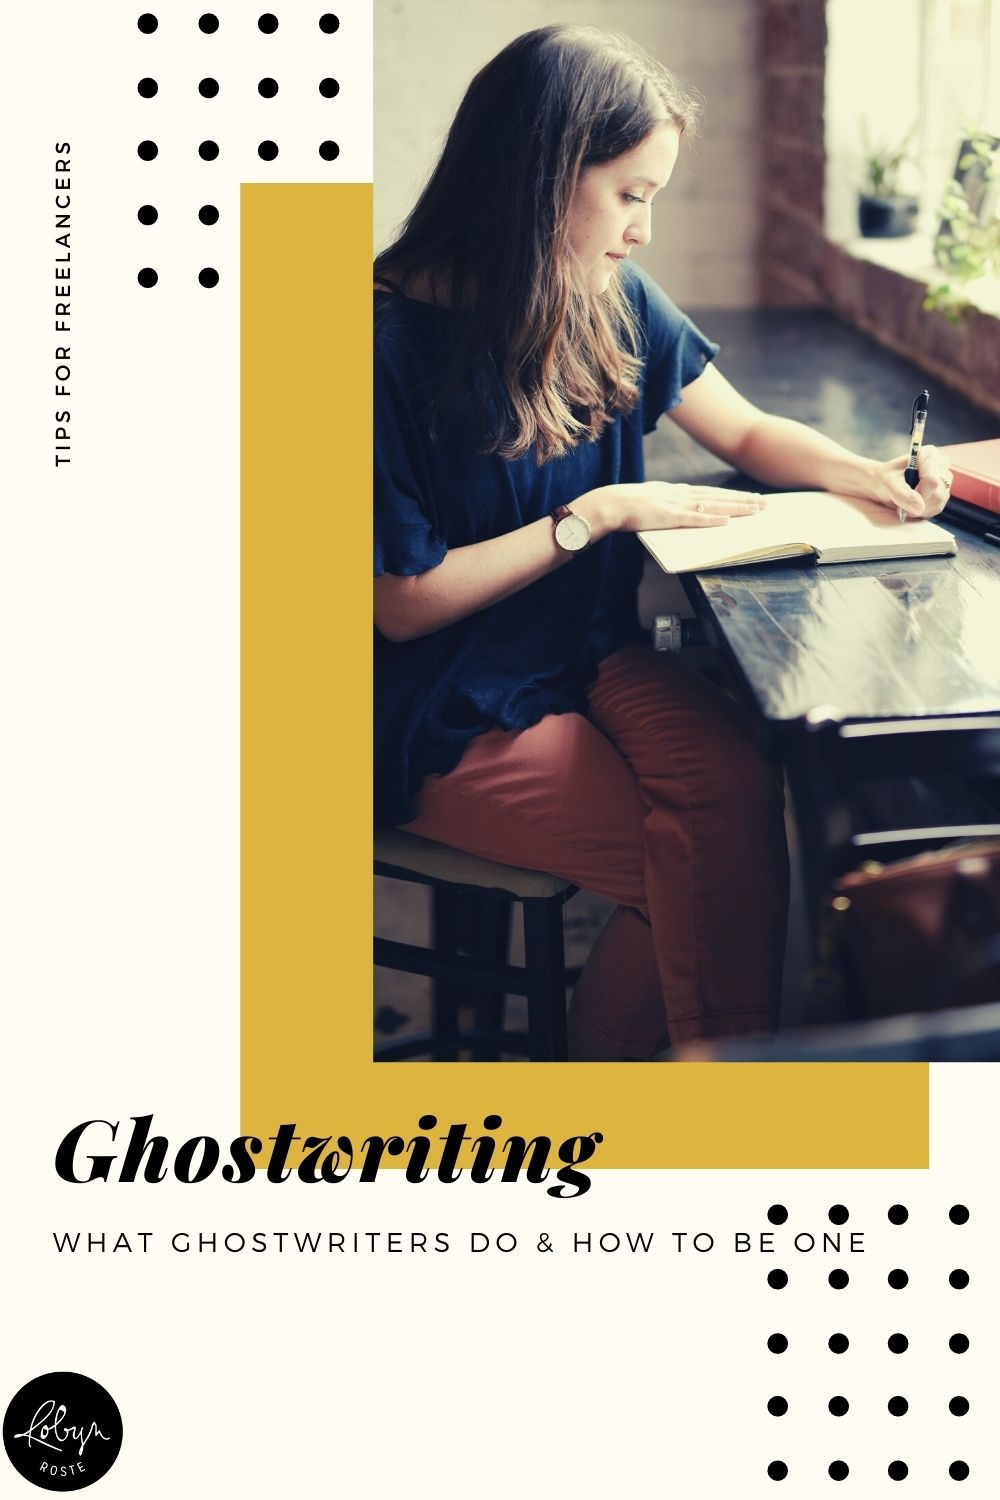 "What is a ghostwriter?" The easiest way to explain ghostwriting to someone who things of the writing life as limited to authoring a book is this: a ghostwriter is someone who writes a book for someone else. They provide the service of writing a book and then release the rights to that book to the person who hired them to do it. 